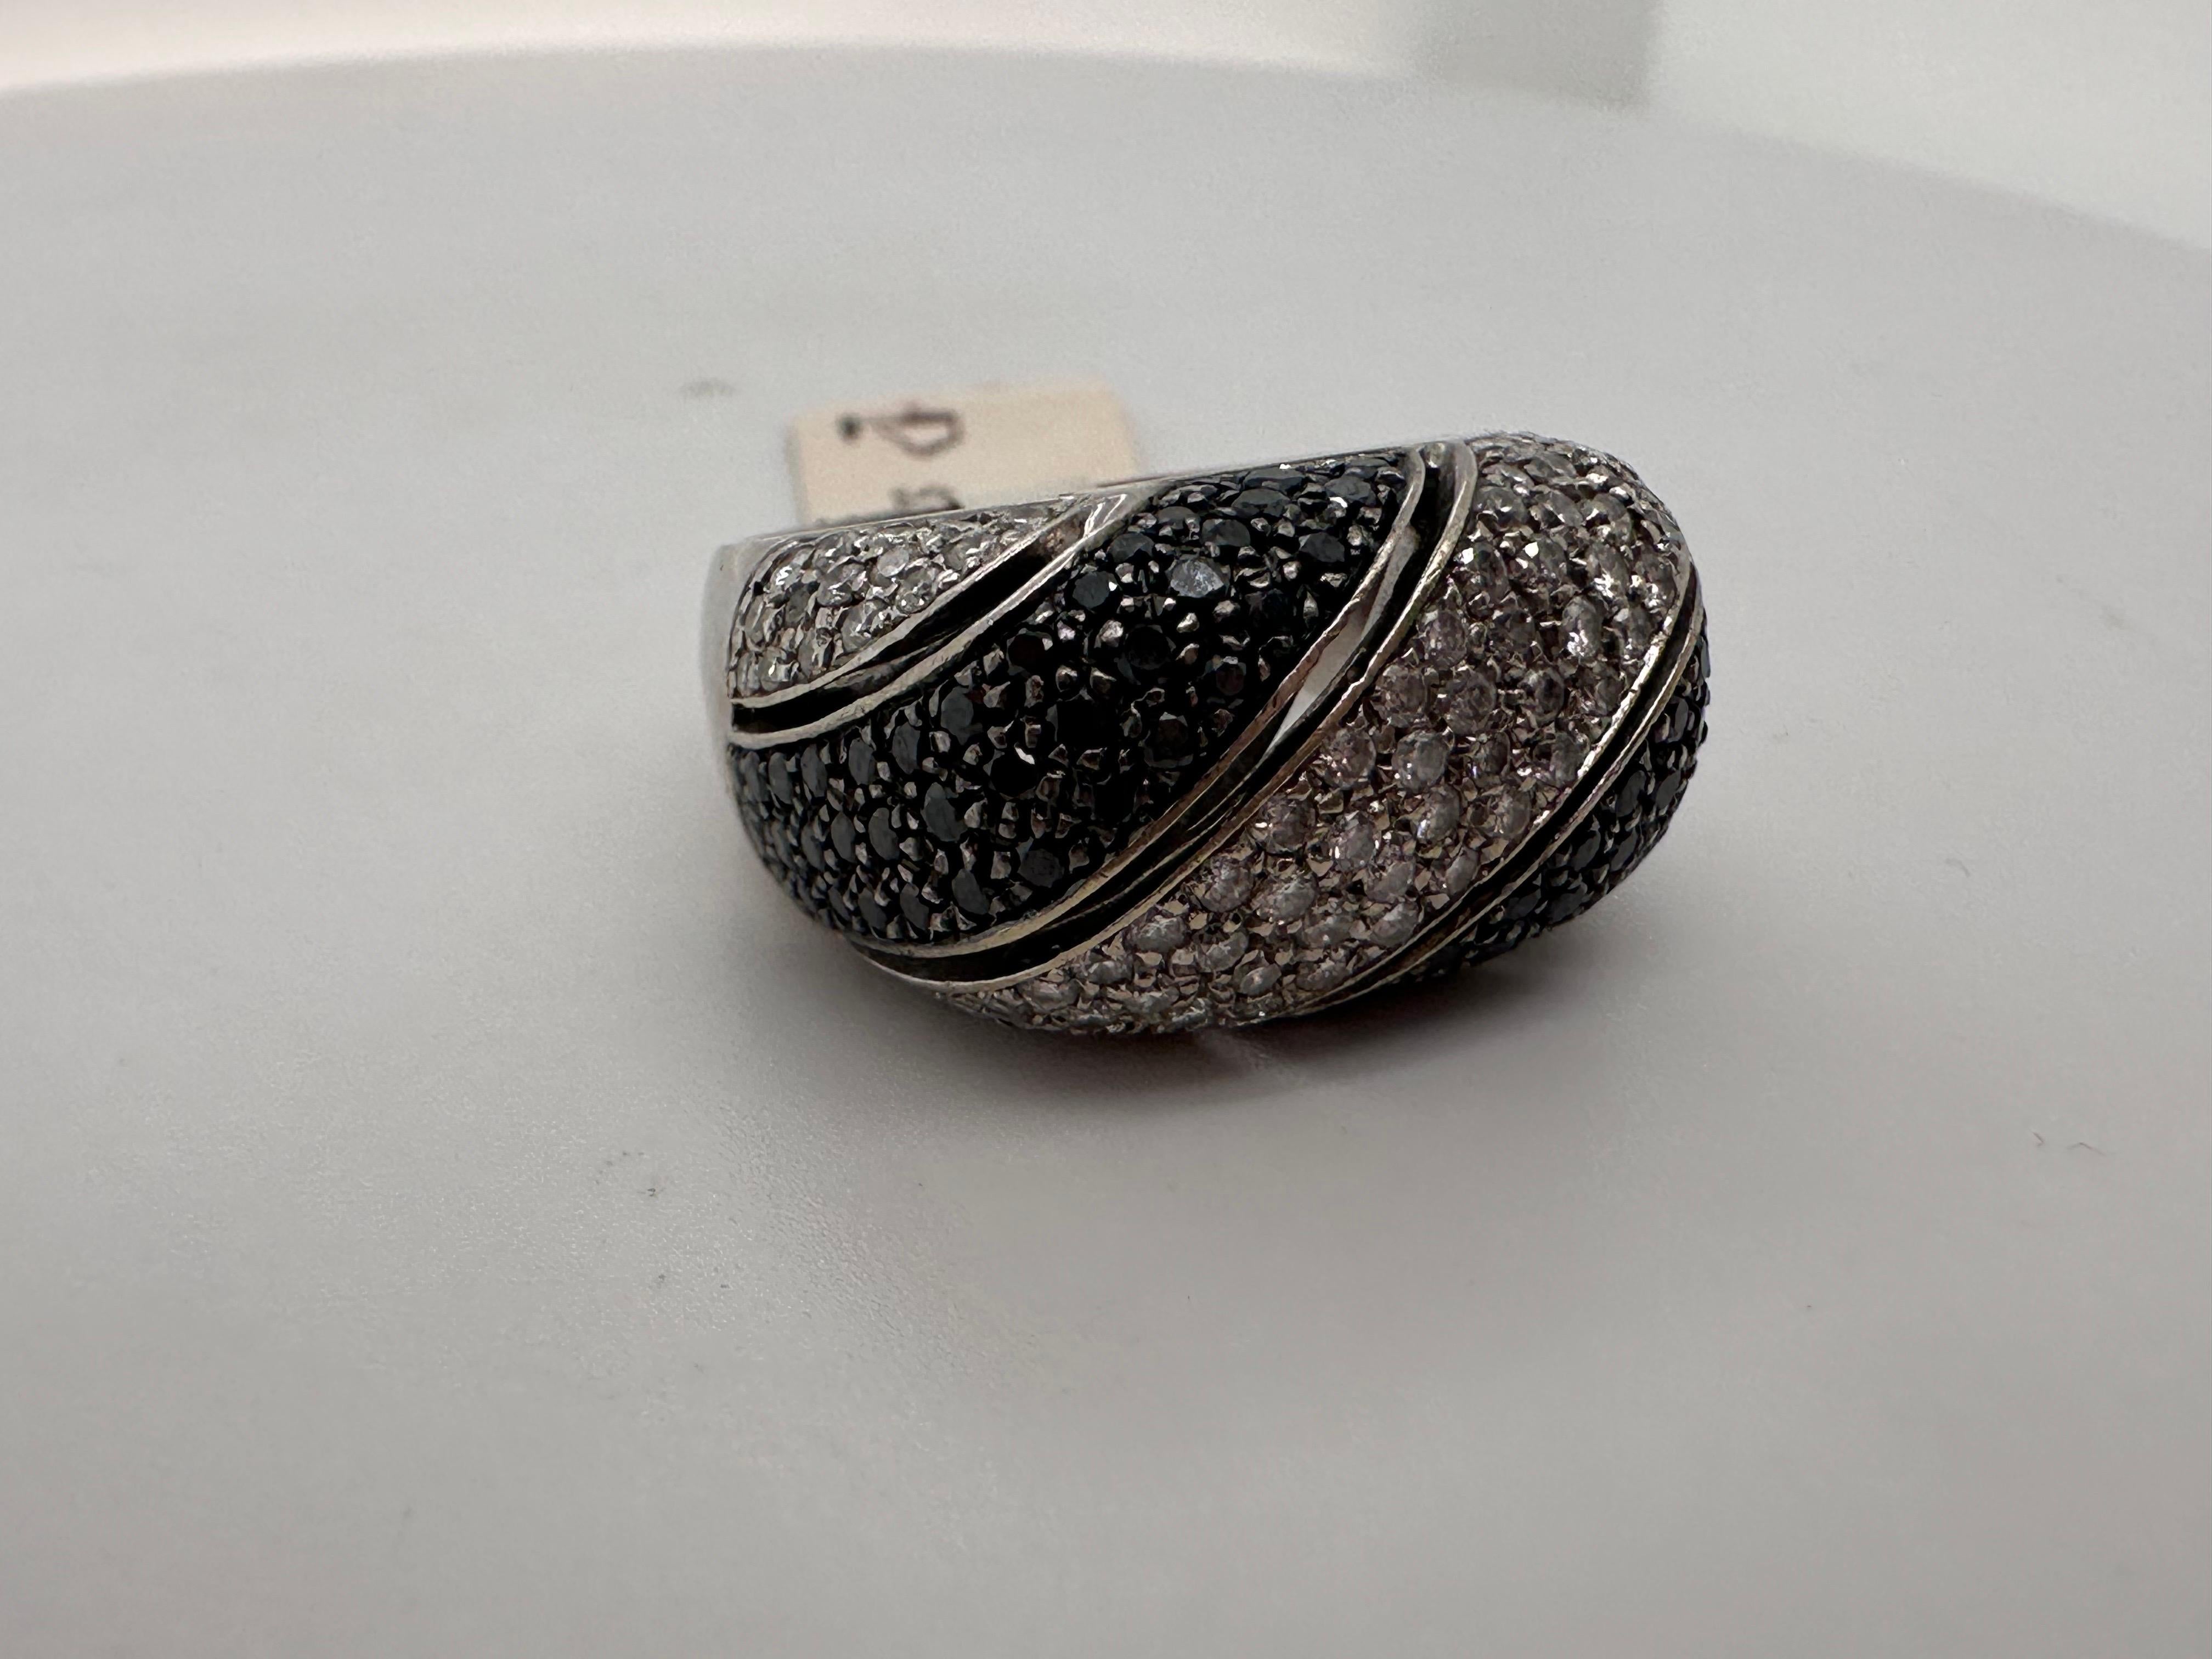 Black and white diamond ring in 14kt gold.

Metal Type: 14KT

Natural Diamond(s): 
Color: G-H
Cut:Round Brilliant
Carat: 0.60ct
Clarity: SI 
Black diamonds weighing 0.70ct -100% natural

Certificate of authenticity comes with purchase!

ABOUT US
We